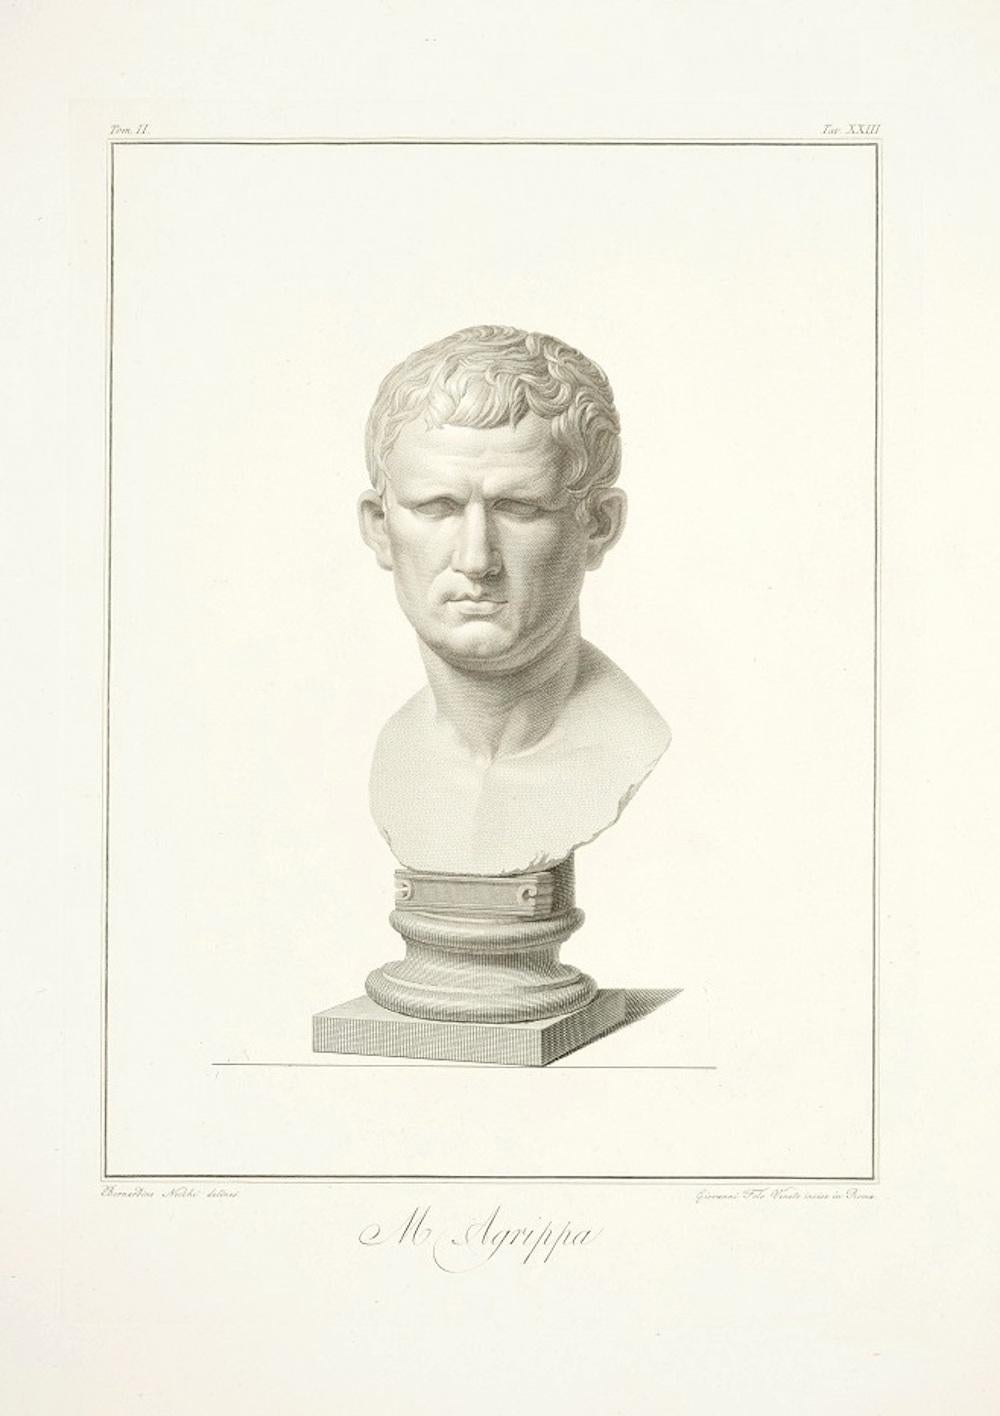 Pietro Fontana Figurative Print - Bust of M. Agrippa - by G. Foto After B. Nocchi - 1821